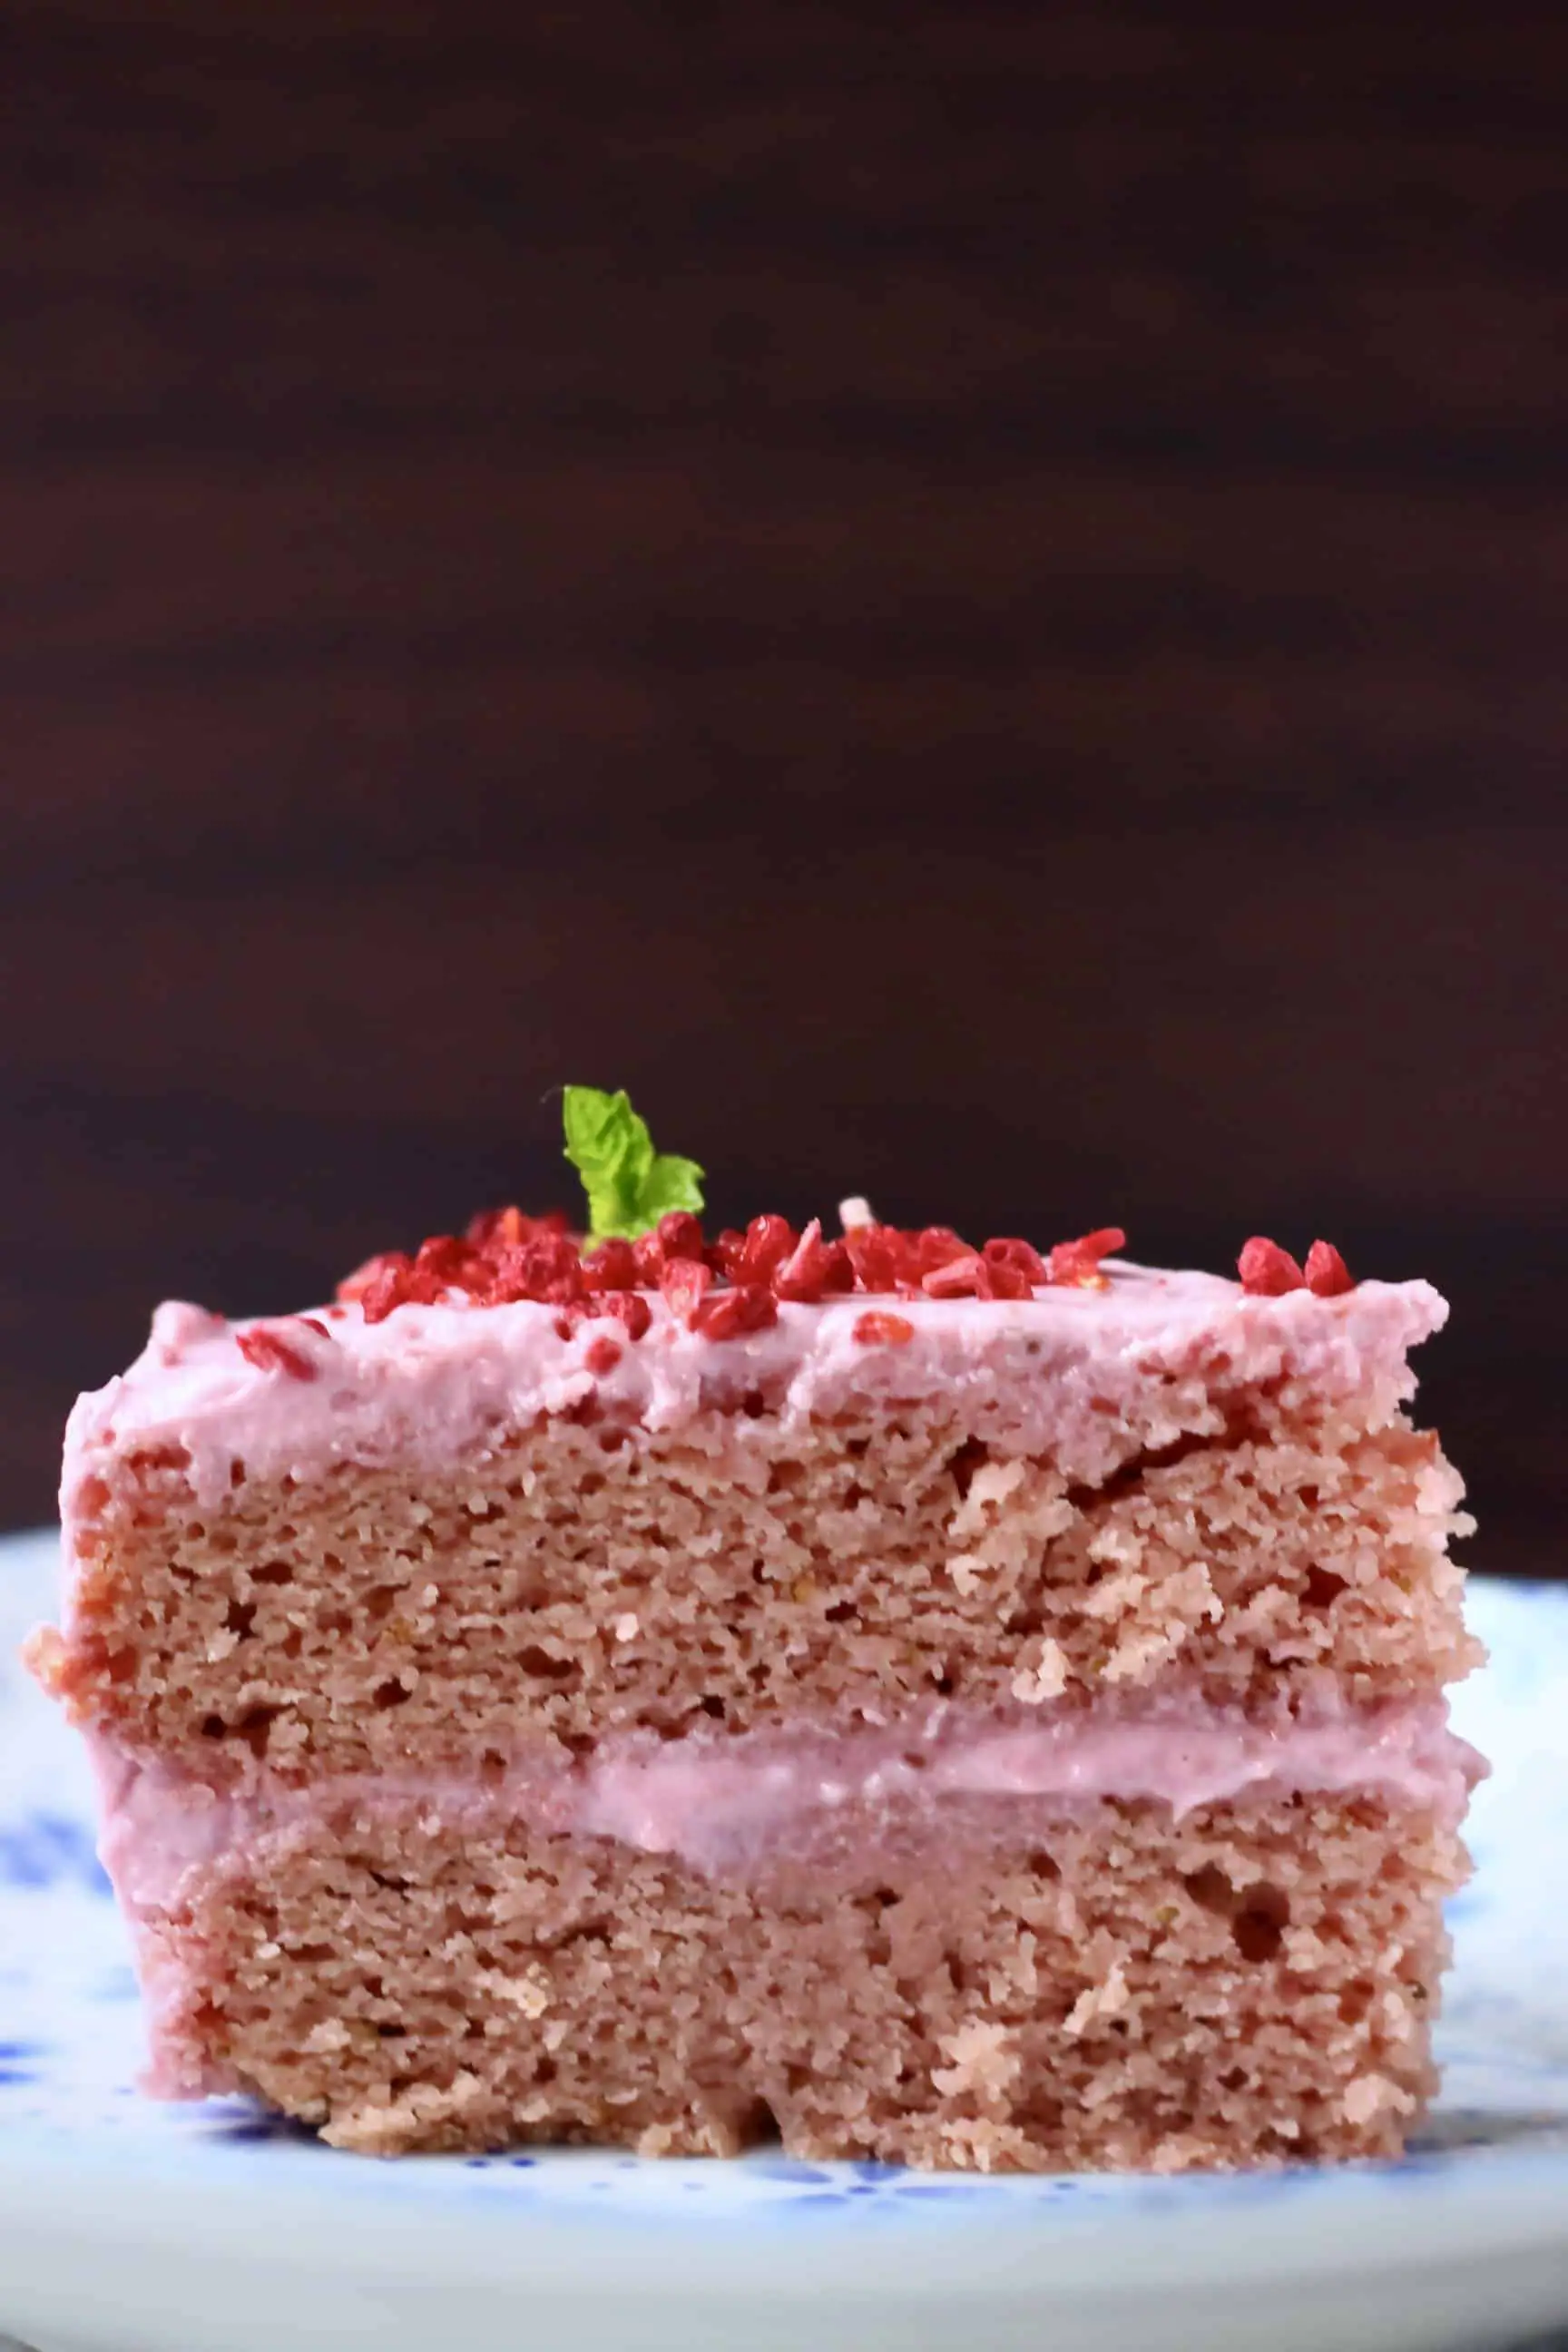 A slice of pink gluten-free vegan strawberry cake with pink strawberry frosting